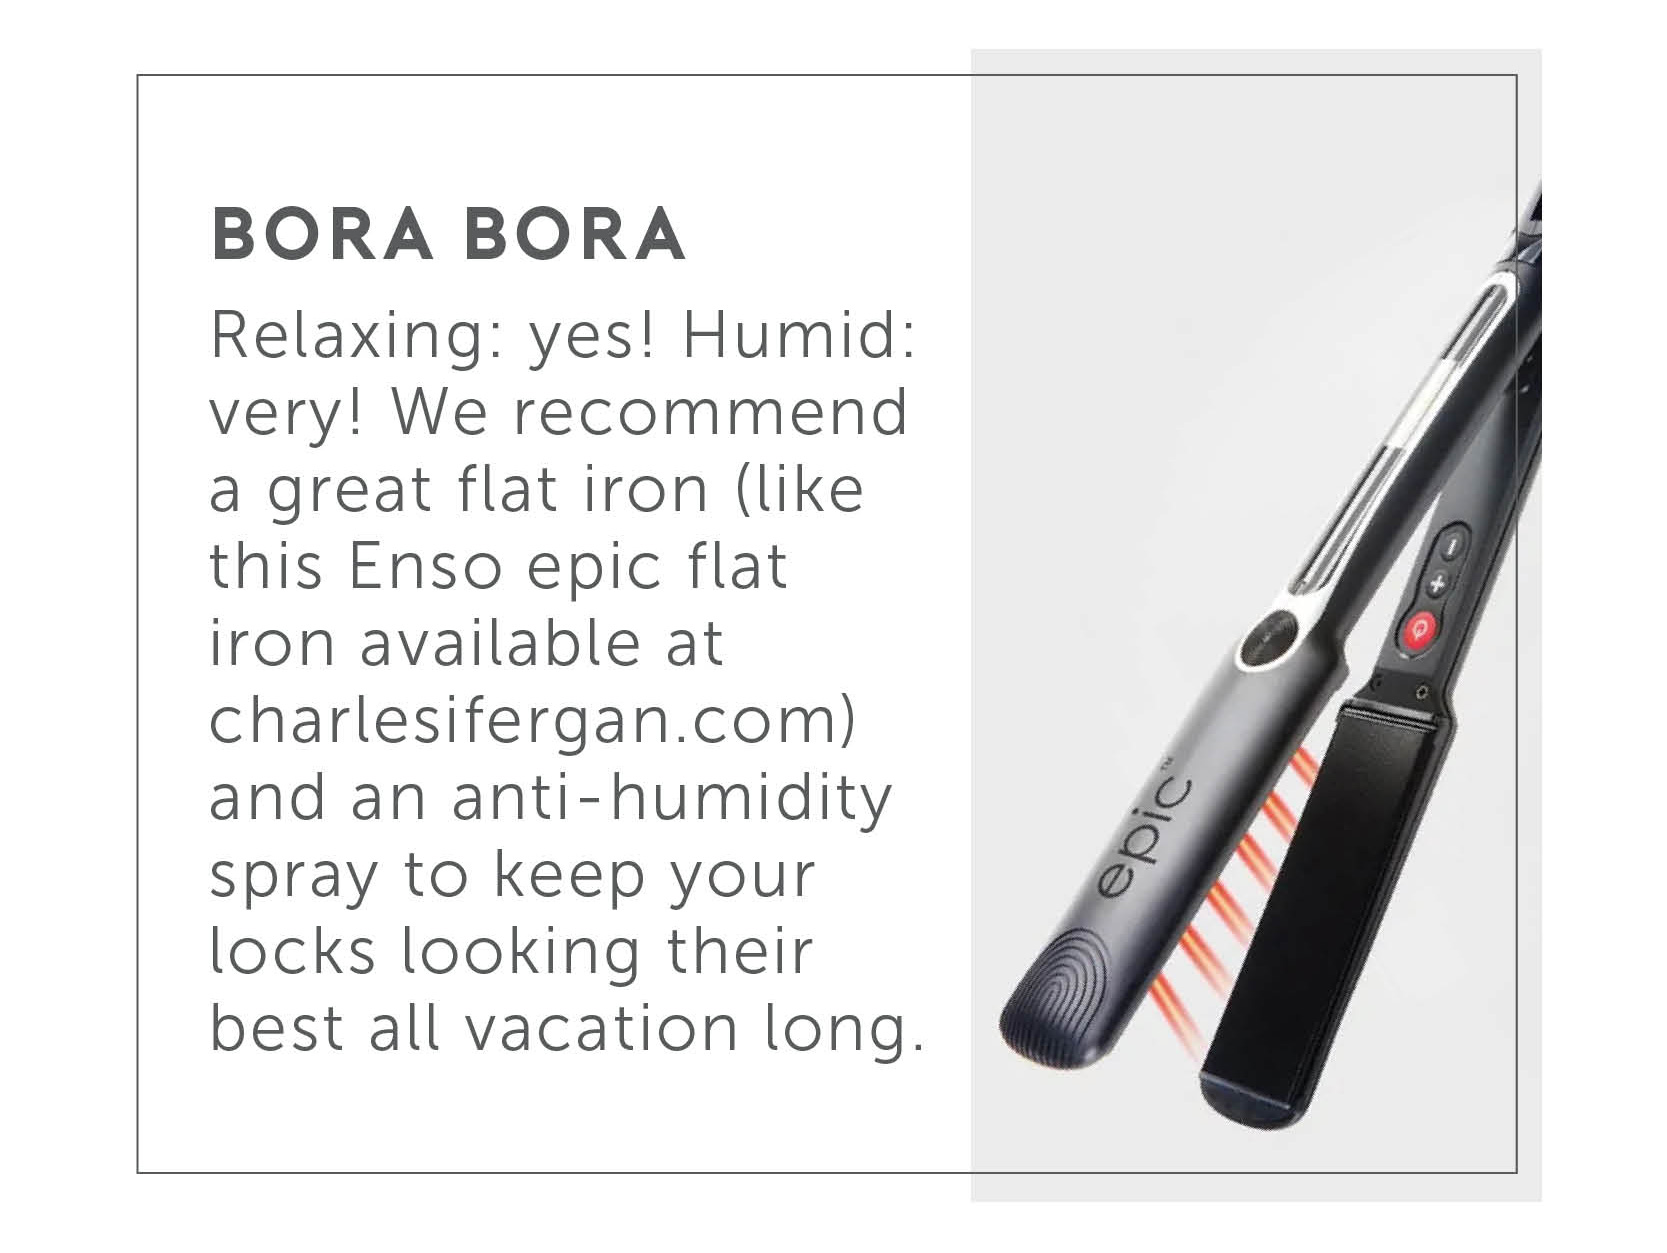 Bora Bora - Relaxing: yes! Humid: very! We recommend a great flat iron (like this Enso Epic Flat Iron available at charlesifergan.com) and an anti-humidity spray to keep your locks looking their best all vacation long. 